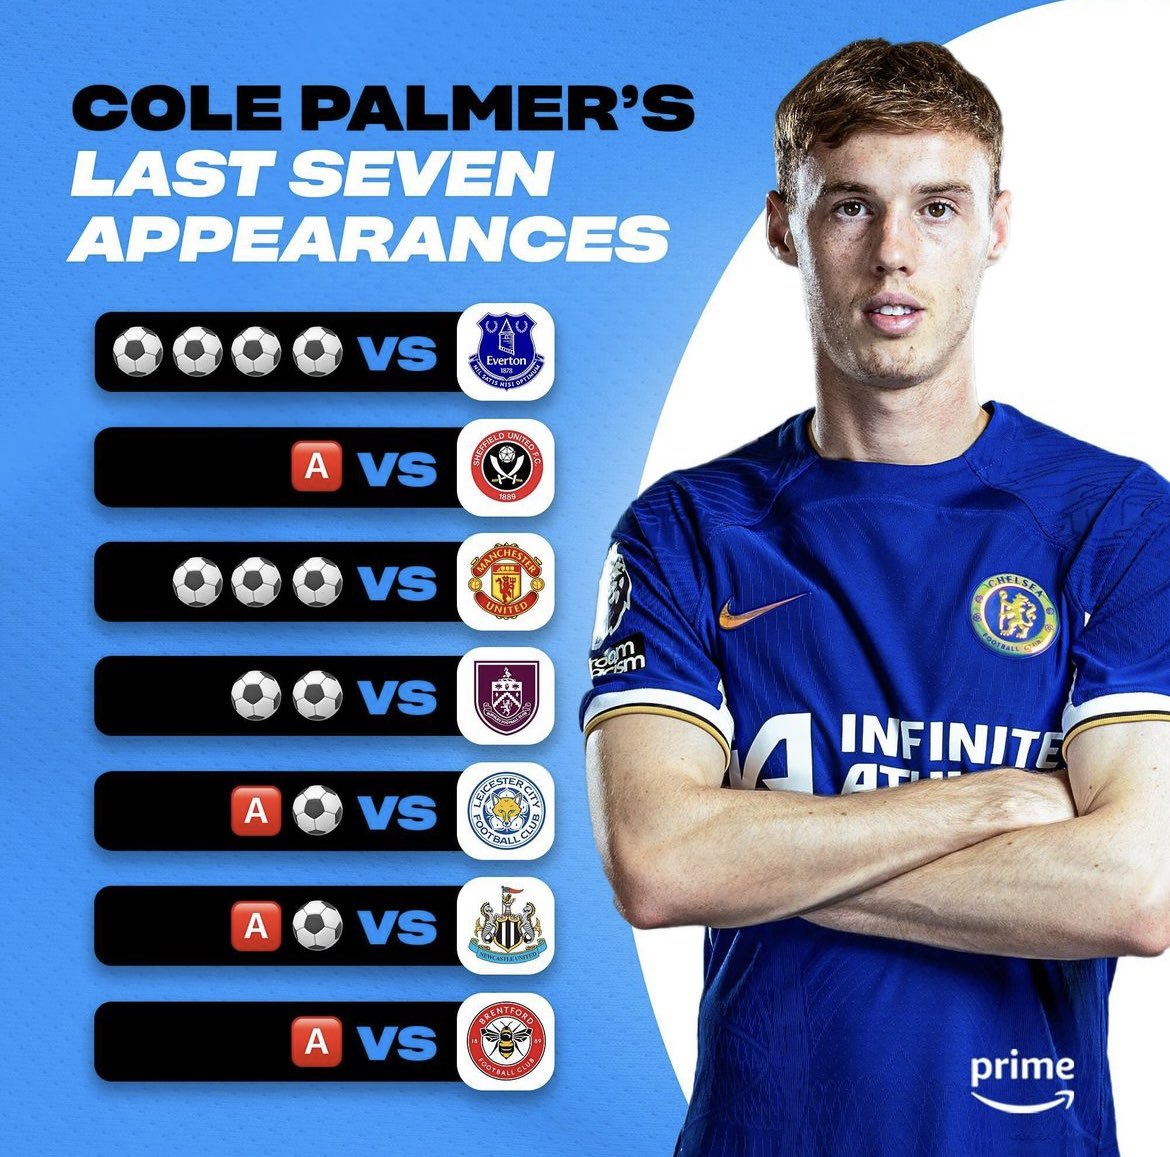 Can we all agree that Cole Palmer is the best signing this season 💯💯💯💯

We are the blues 💙💙💙